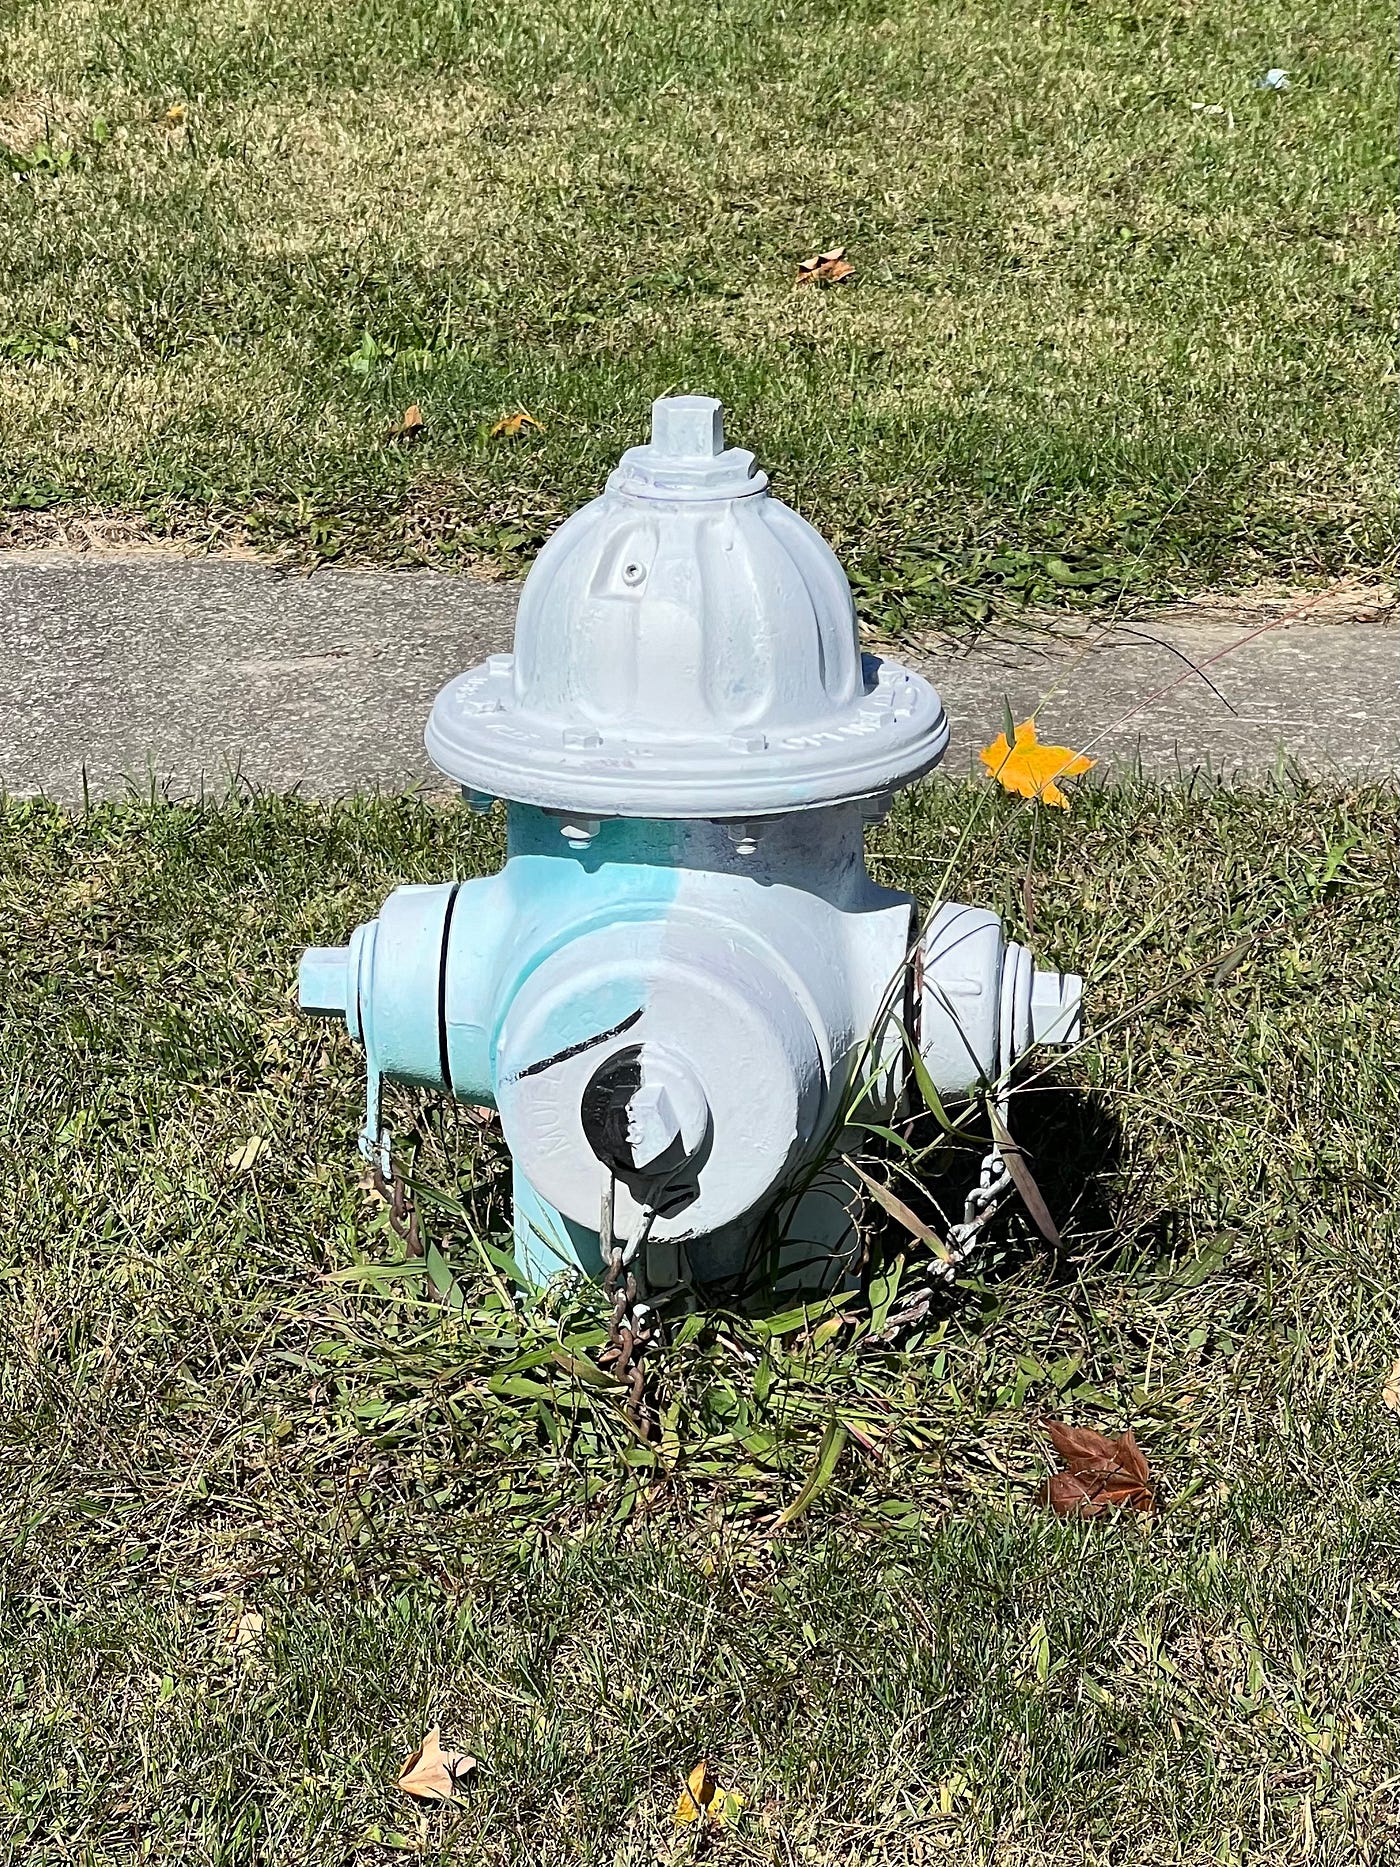 No water is coming out of this hydrant. #geocaching #geocache #firefig